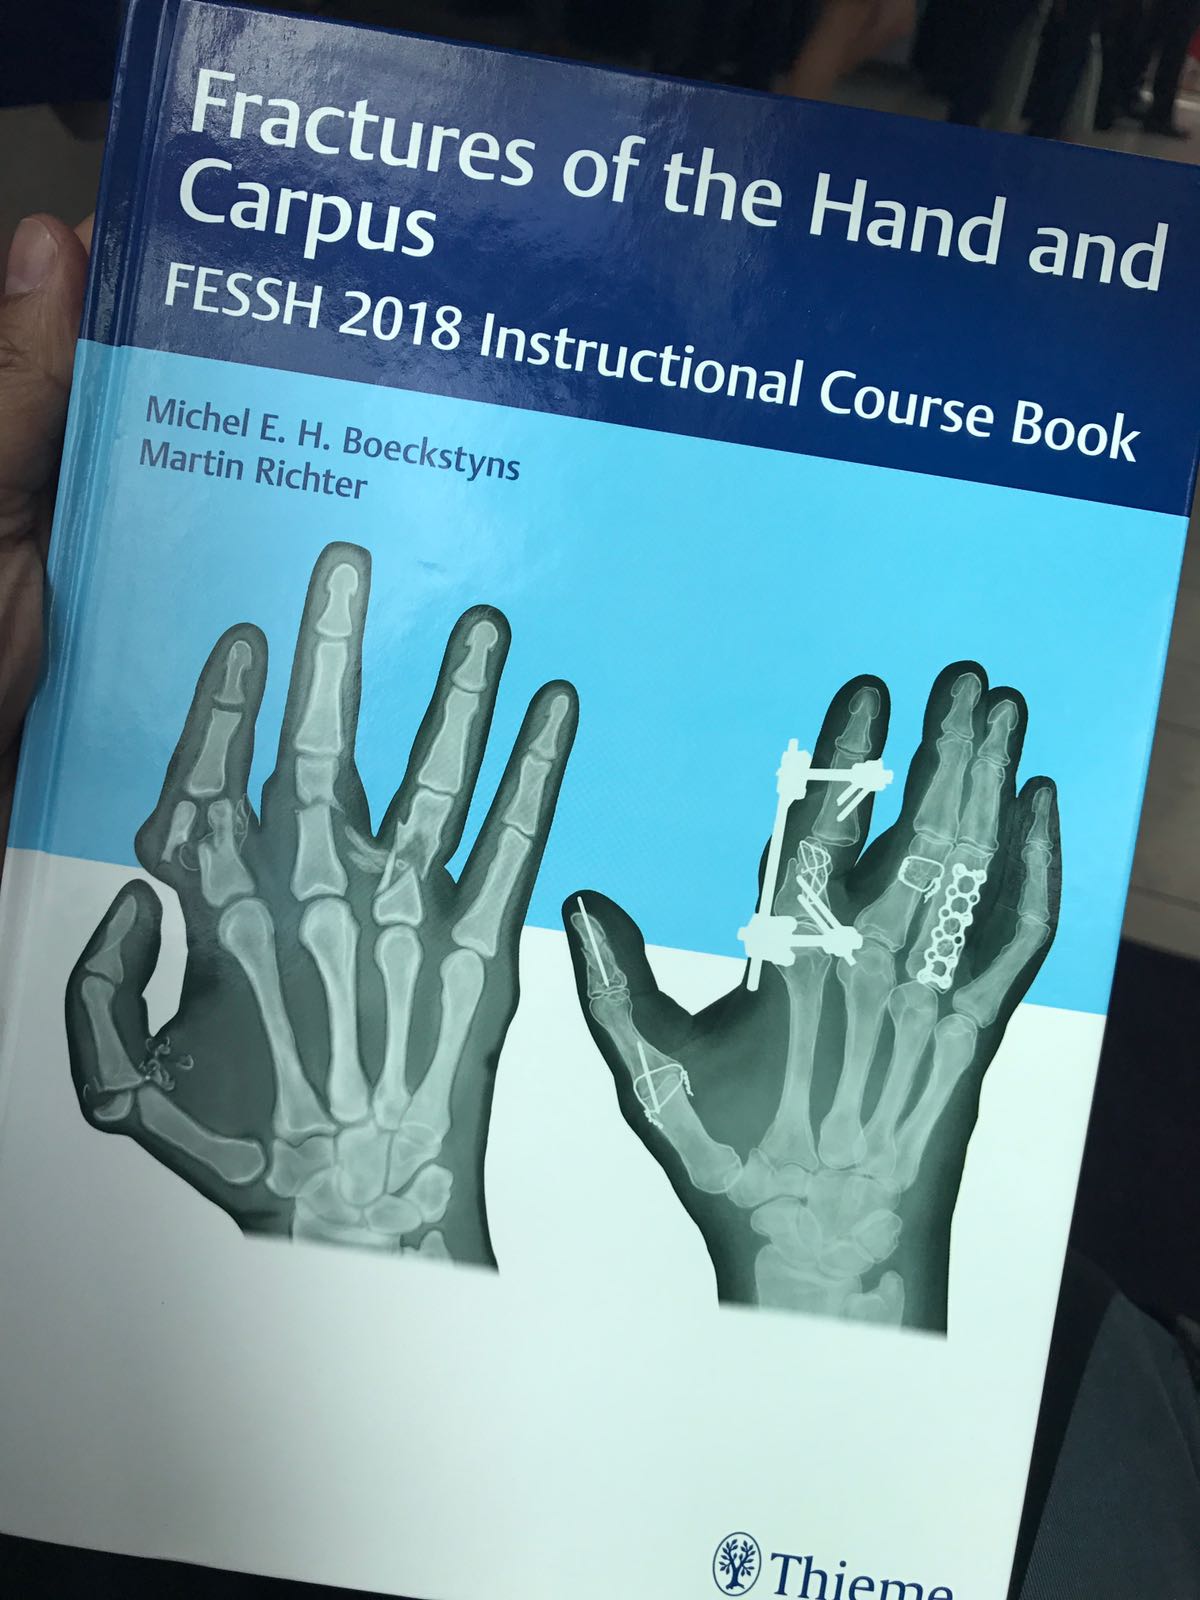 Publication of Book Chapter on Hand Fractures